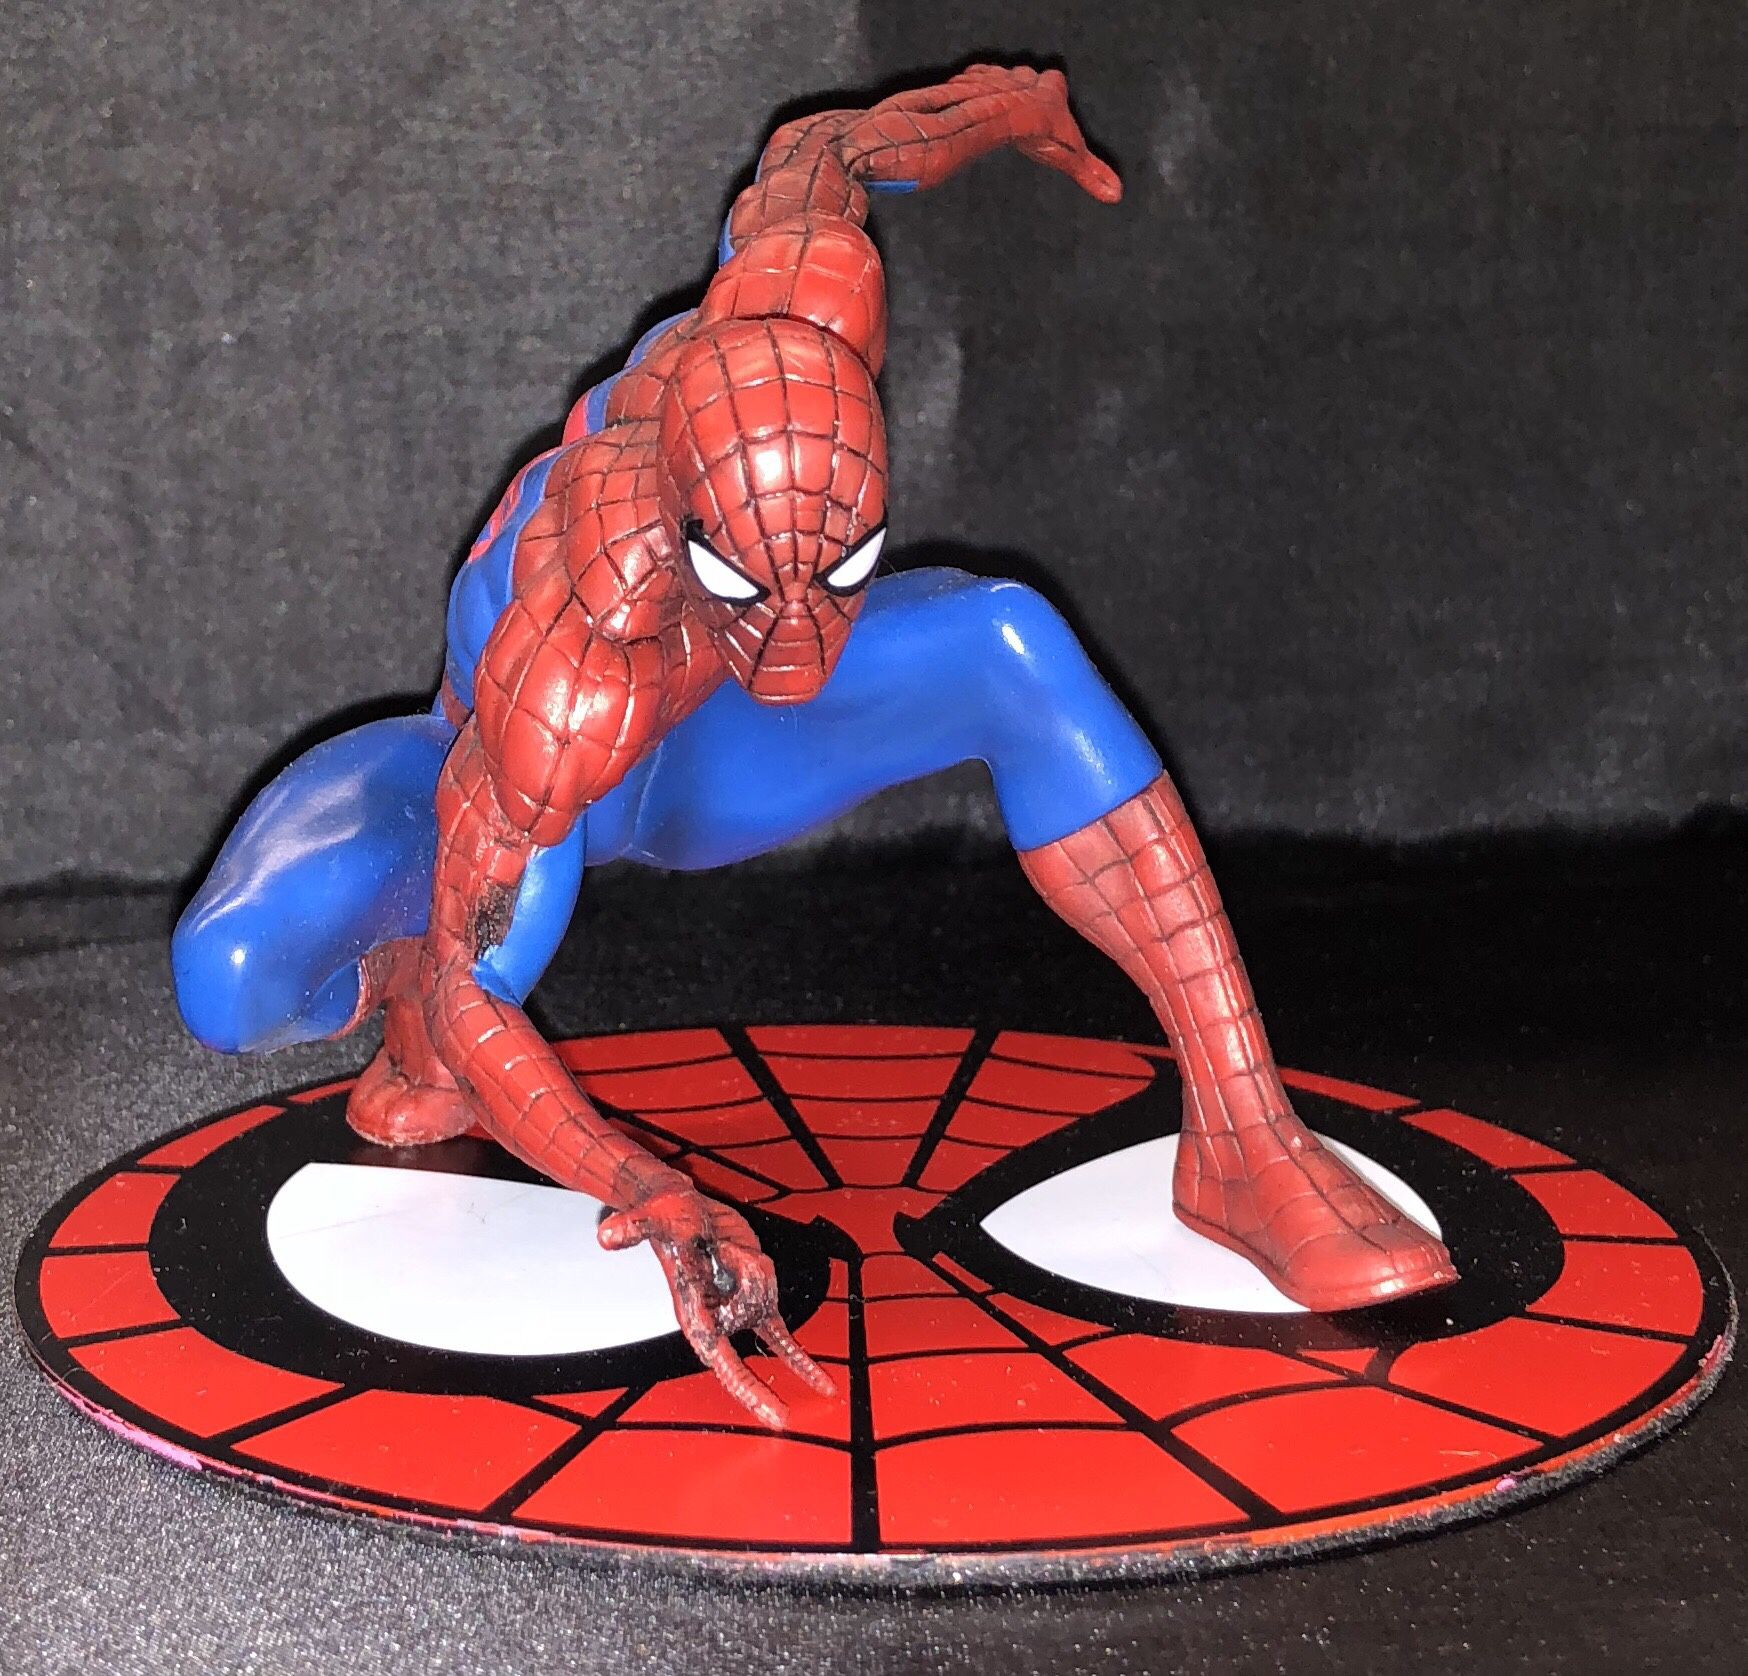 Spider-man artfx statue magnetic base. Spiderman collectible